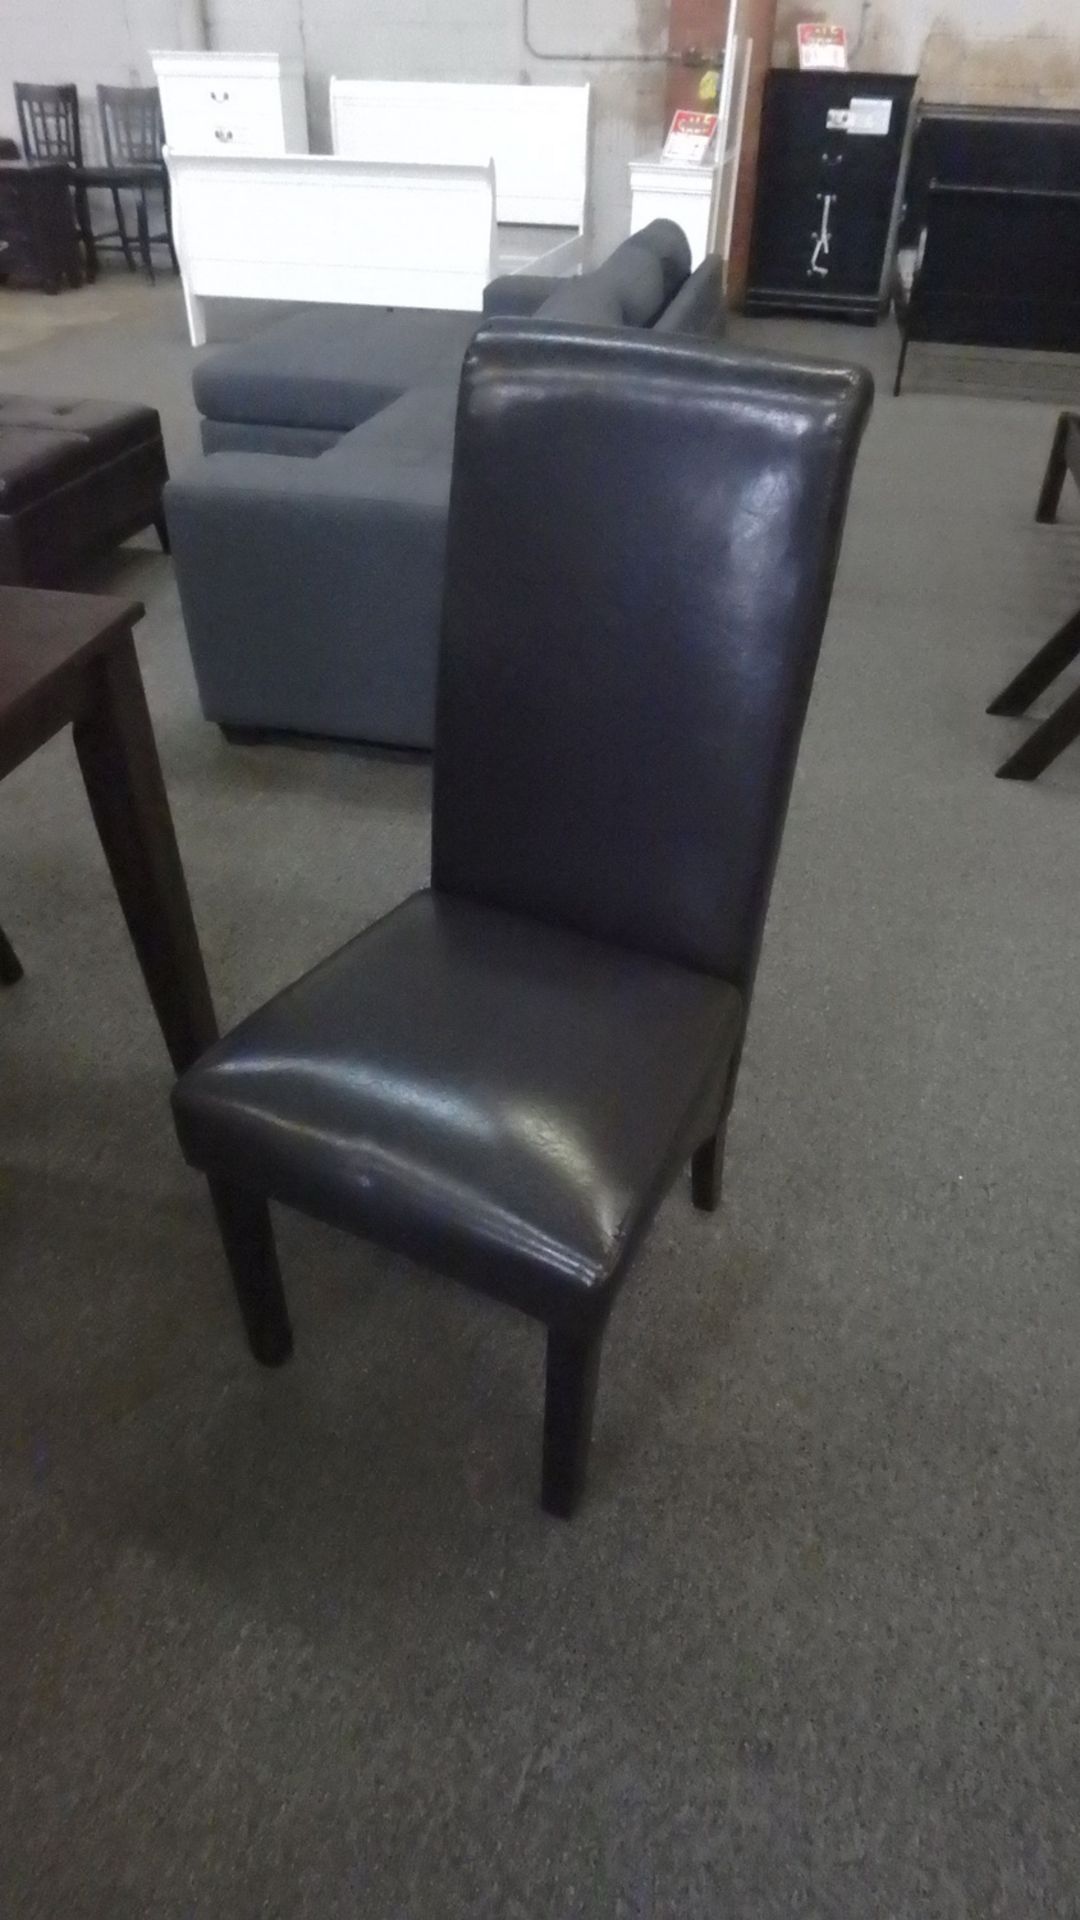 BOXES - (LK-9023) ESPRESSO DINING CHAIR (NEW IN BOX) (2 CHAIRS / BOX) - Image 2 of 2